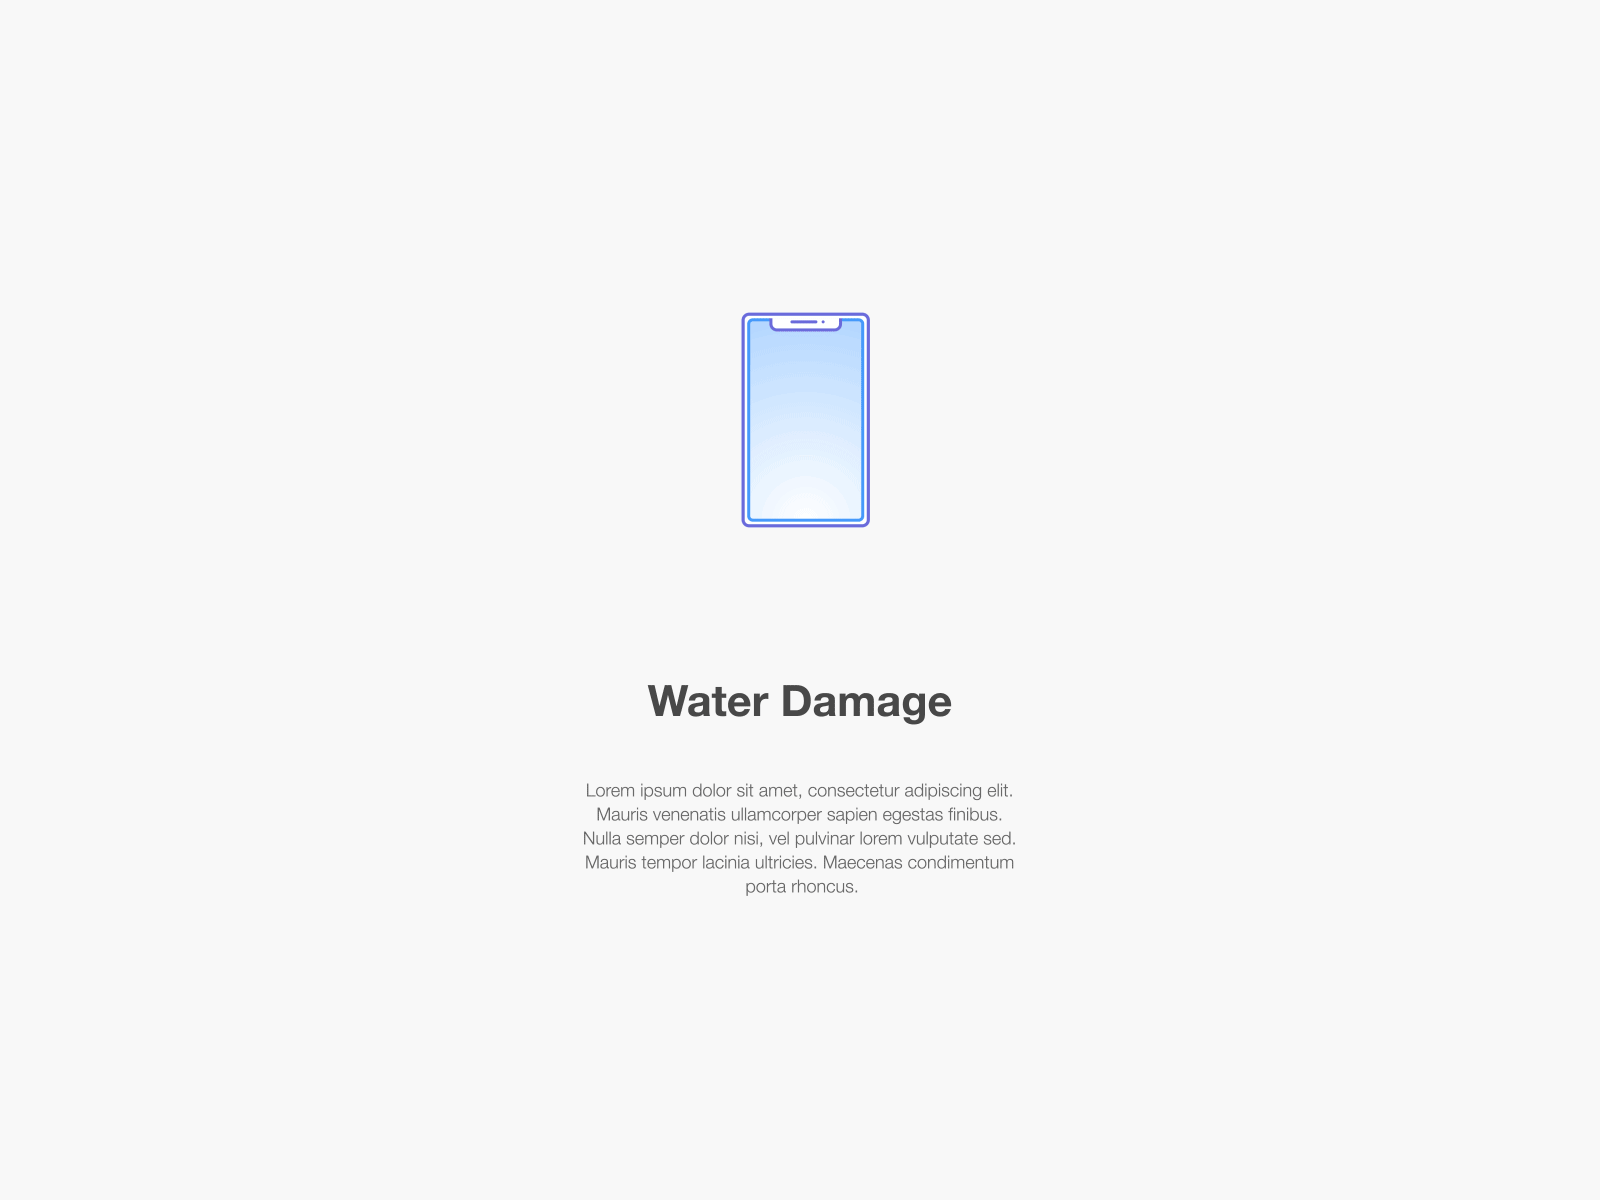 Water Damage 2d animation device gif illustration loop phone